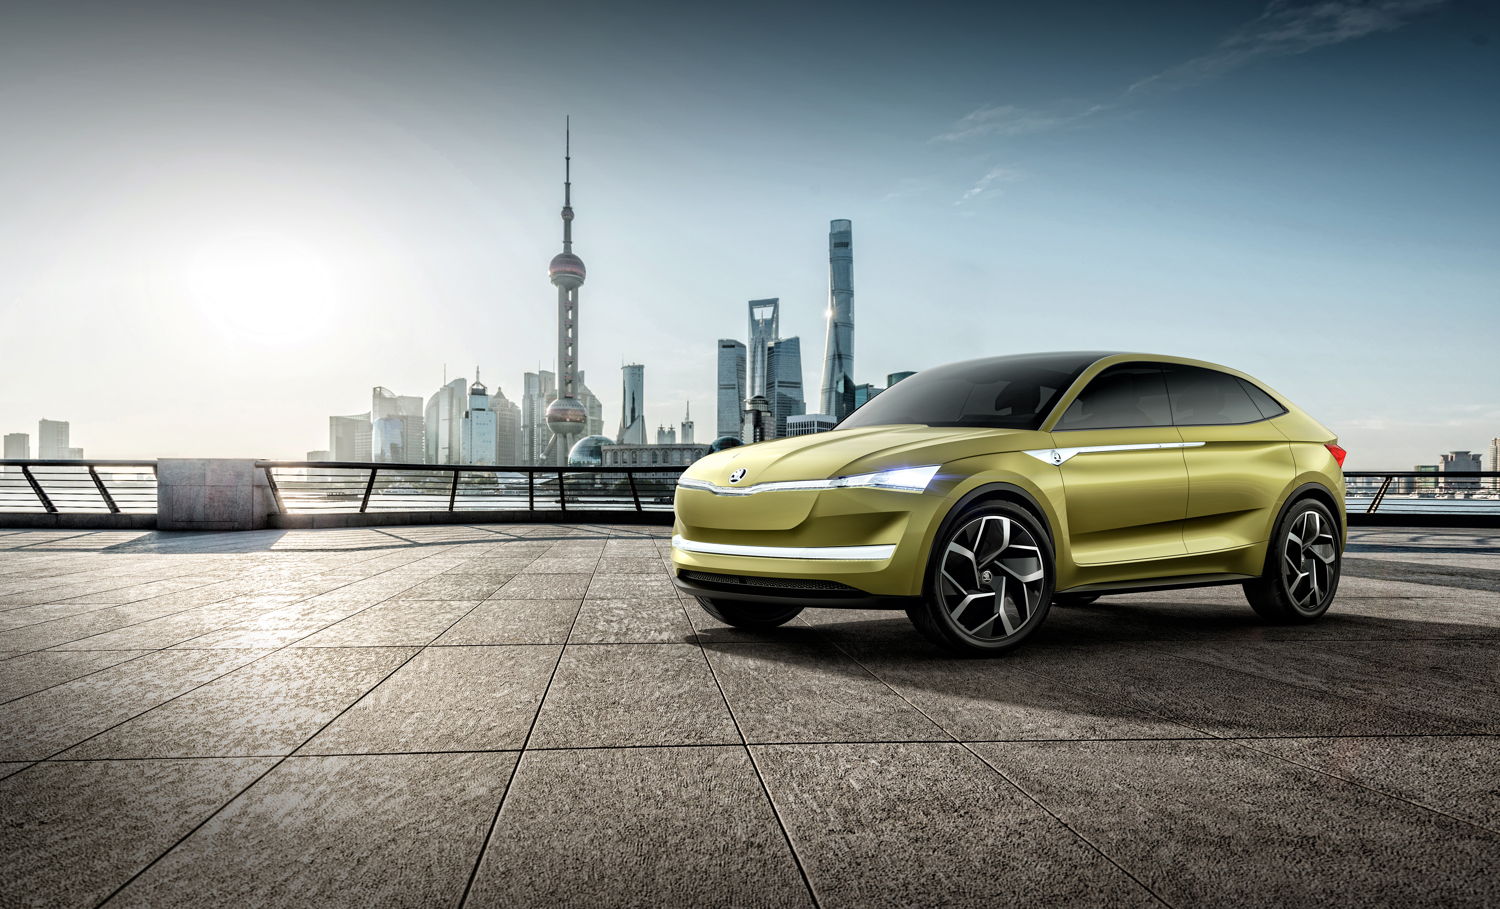 At the 2017 Auto Shanghai exhibition, ŠKODA presents the first purely electrically powered concept car, the ŠKODA VISION E, and provides a look into the company's future.